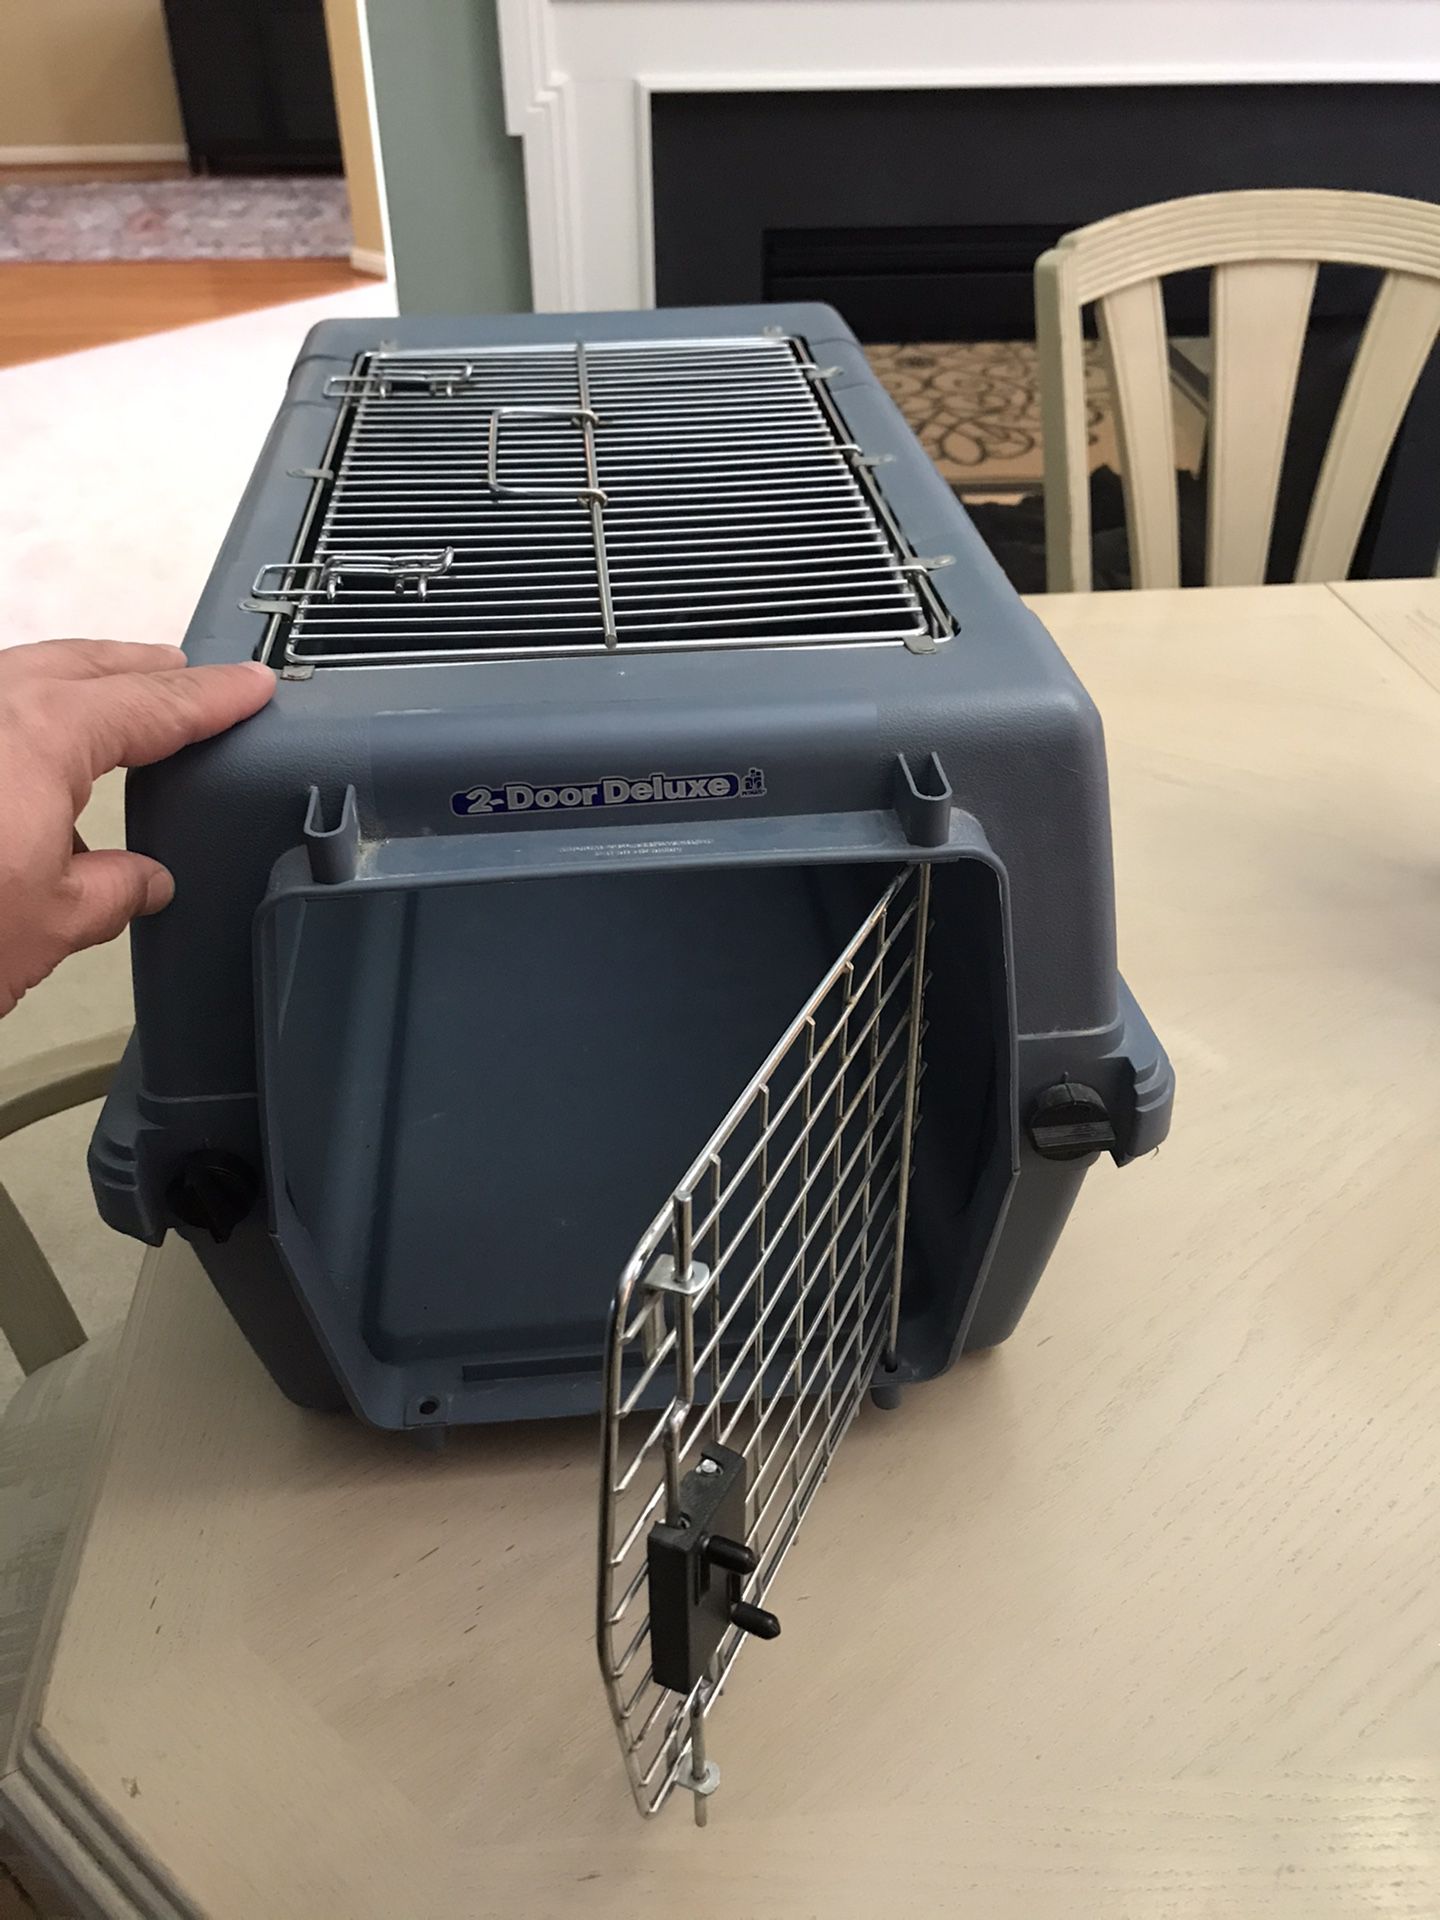 Petmate Pet Carrier, Cat Carrier, Dog Carrier, Pet Taxi, 2 Door Deluxe. Condition is Used.